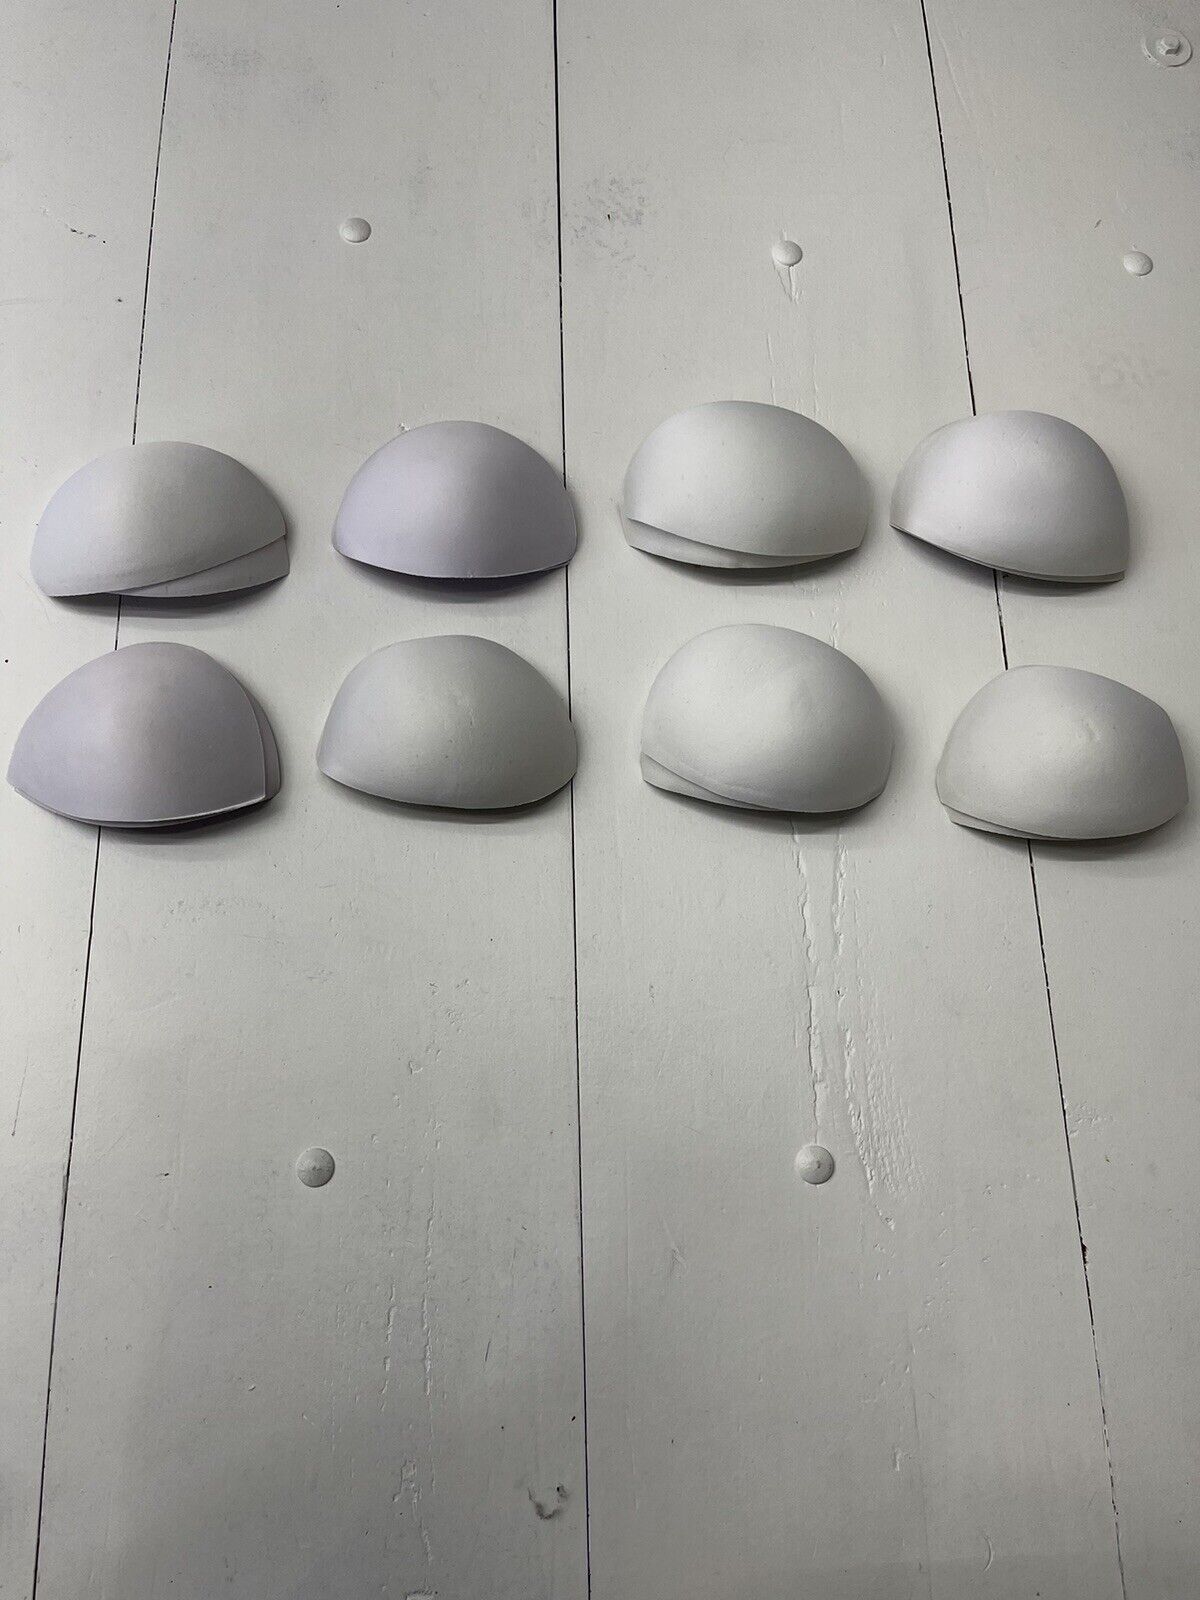 Sew-in White Teardrop Bra Cups Pads Inserts 8 Pairs Size 32